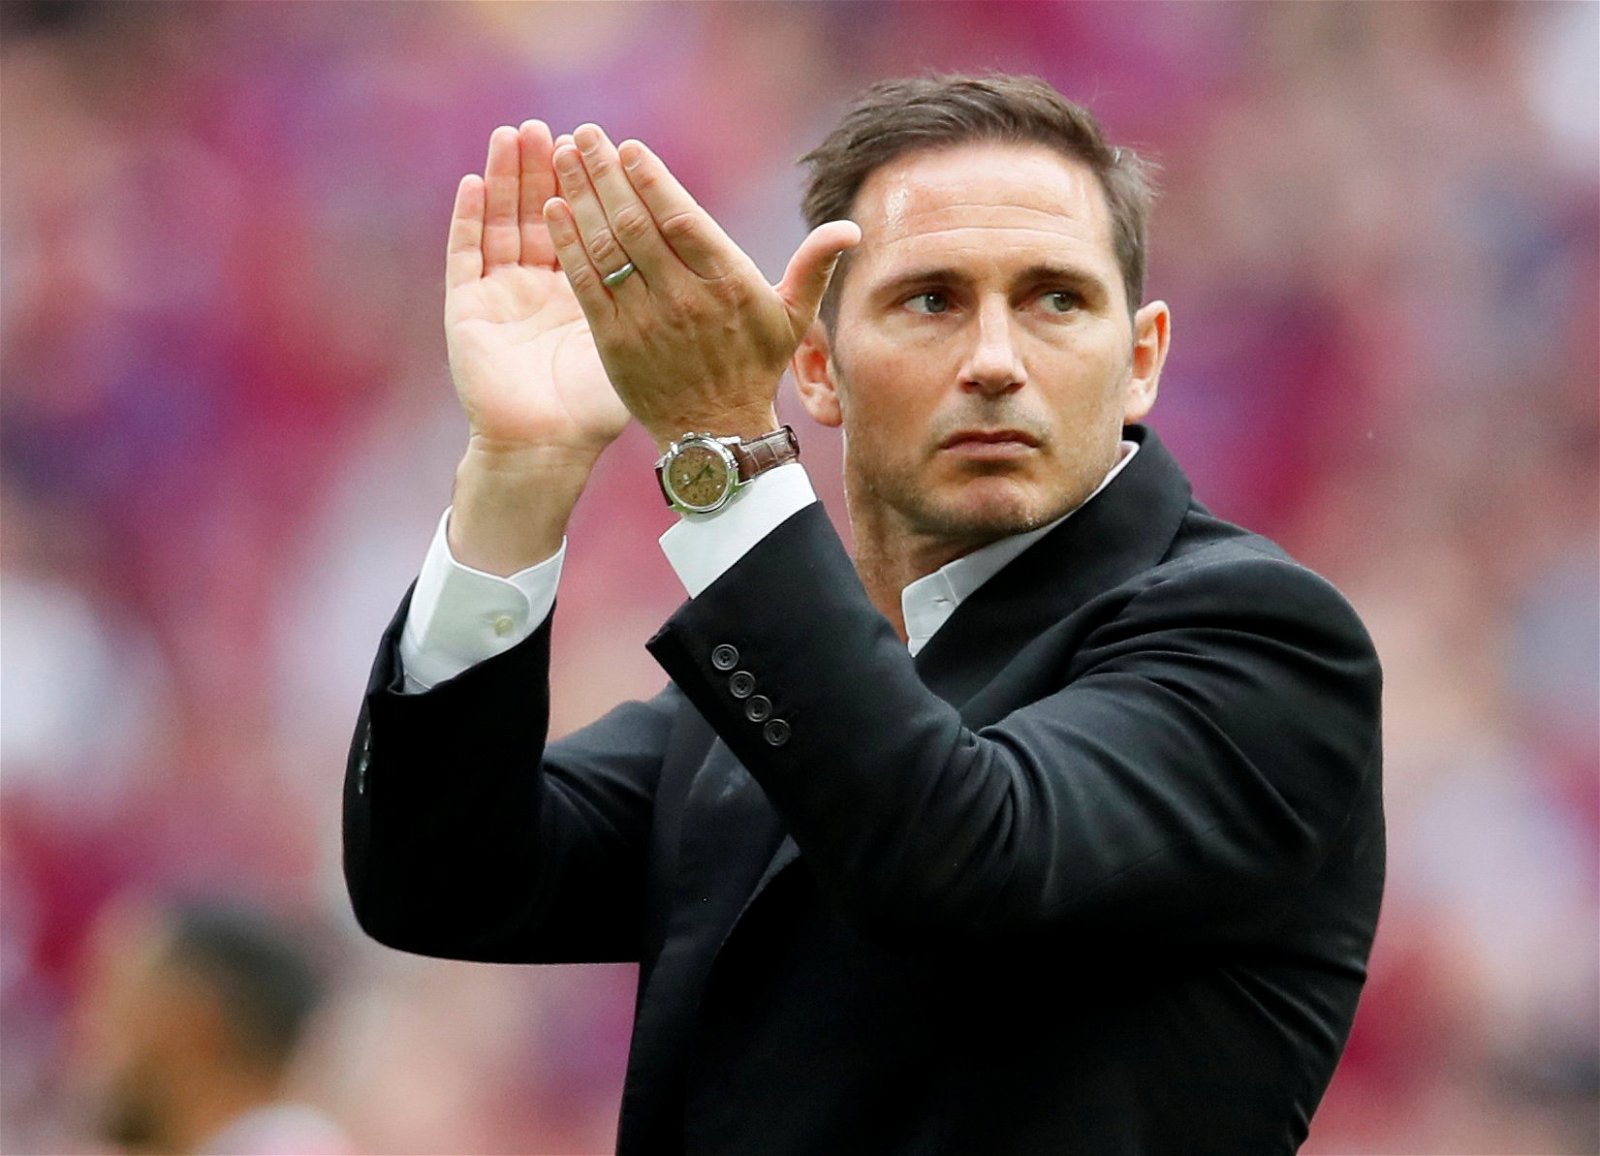 Frank Lampard: Chelsea's new manager?